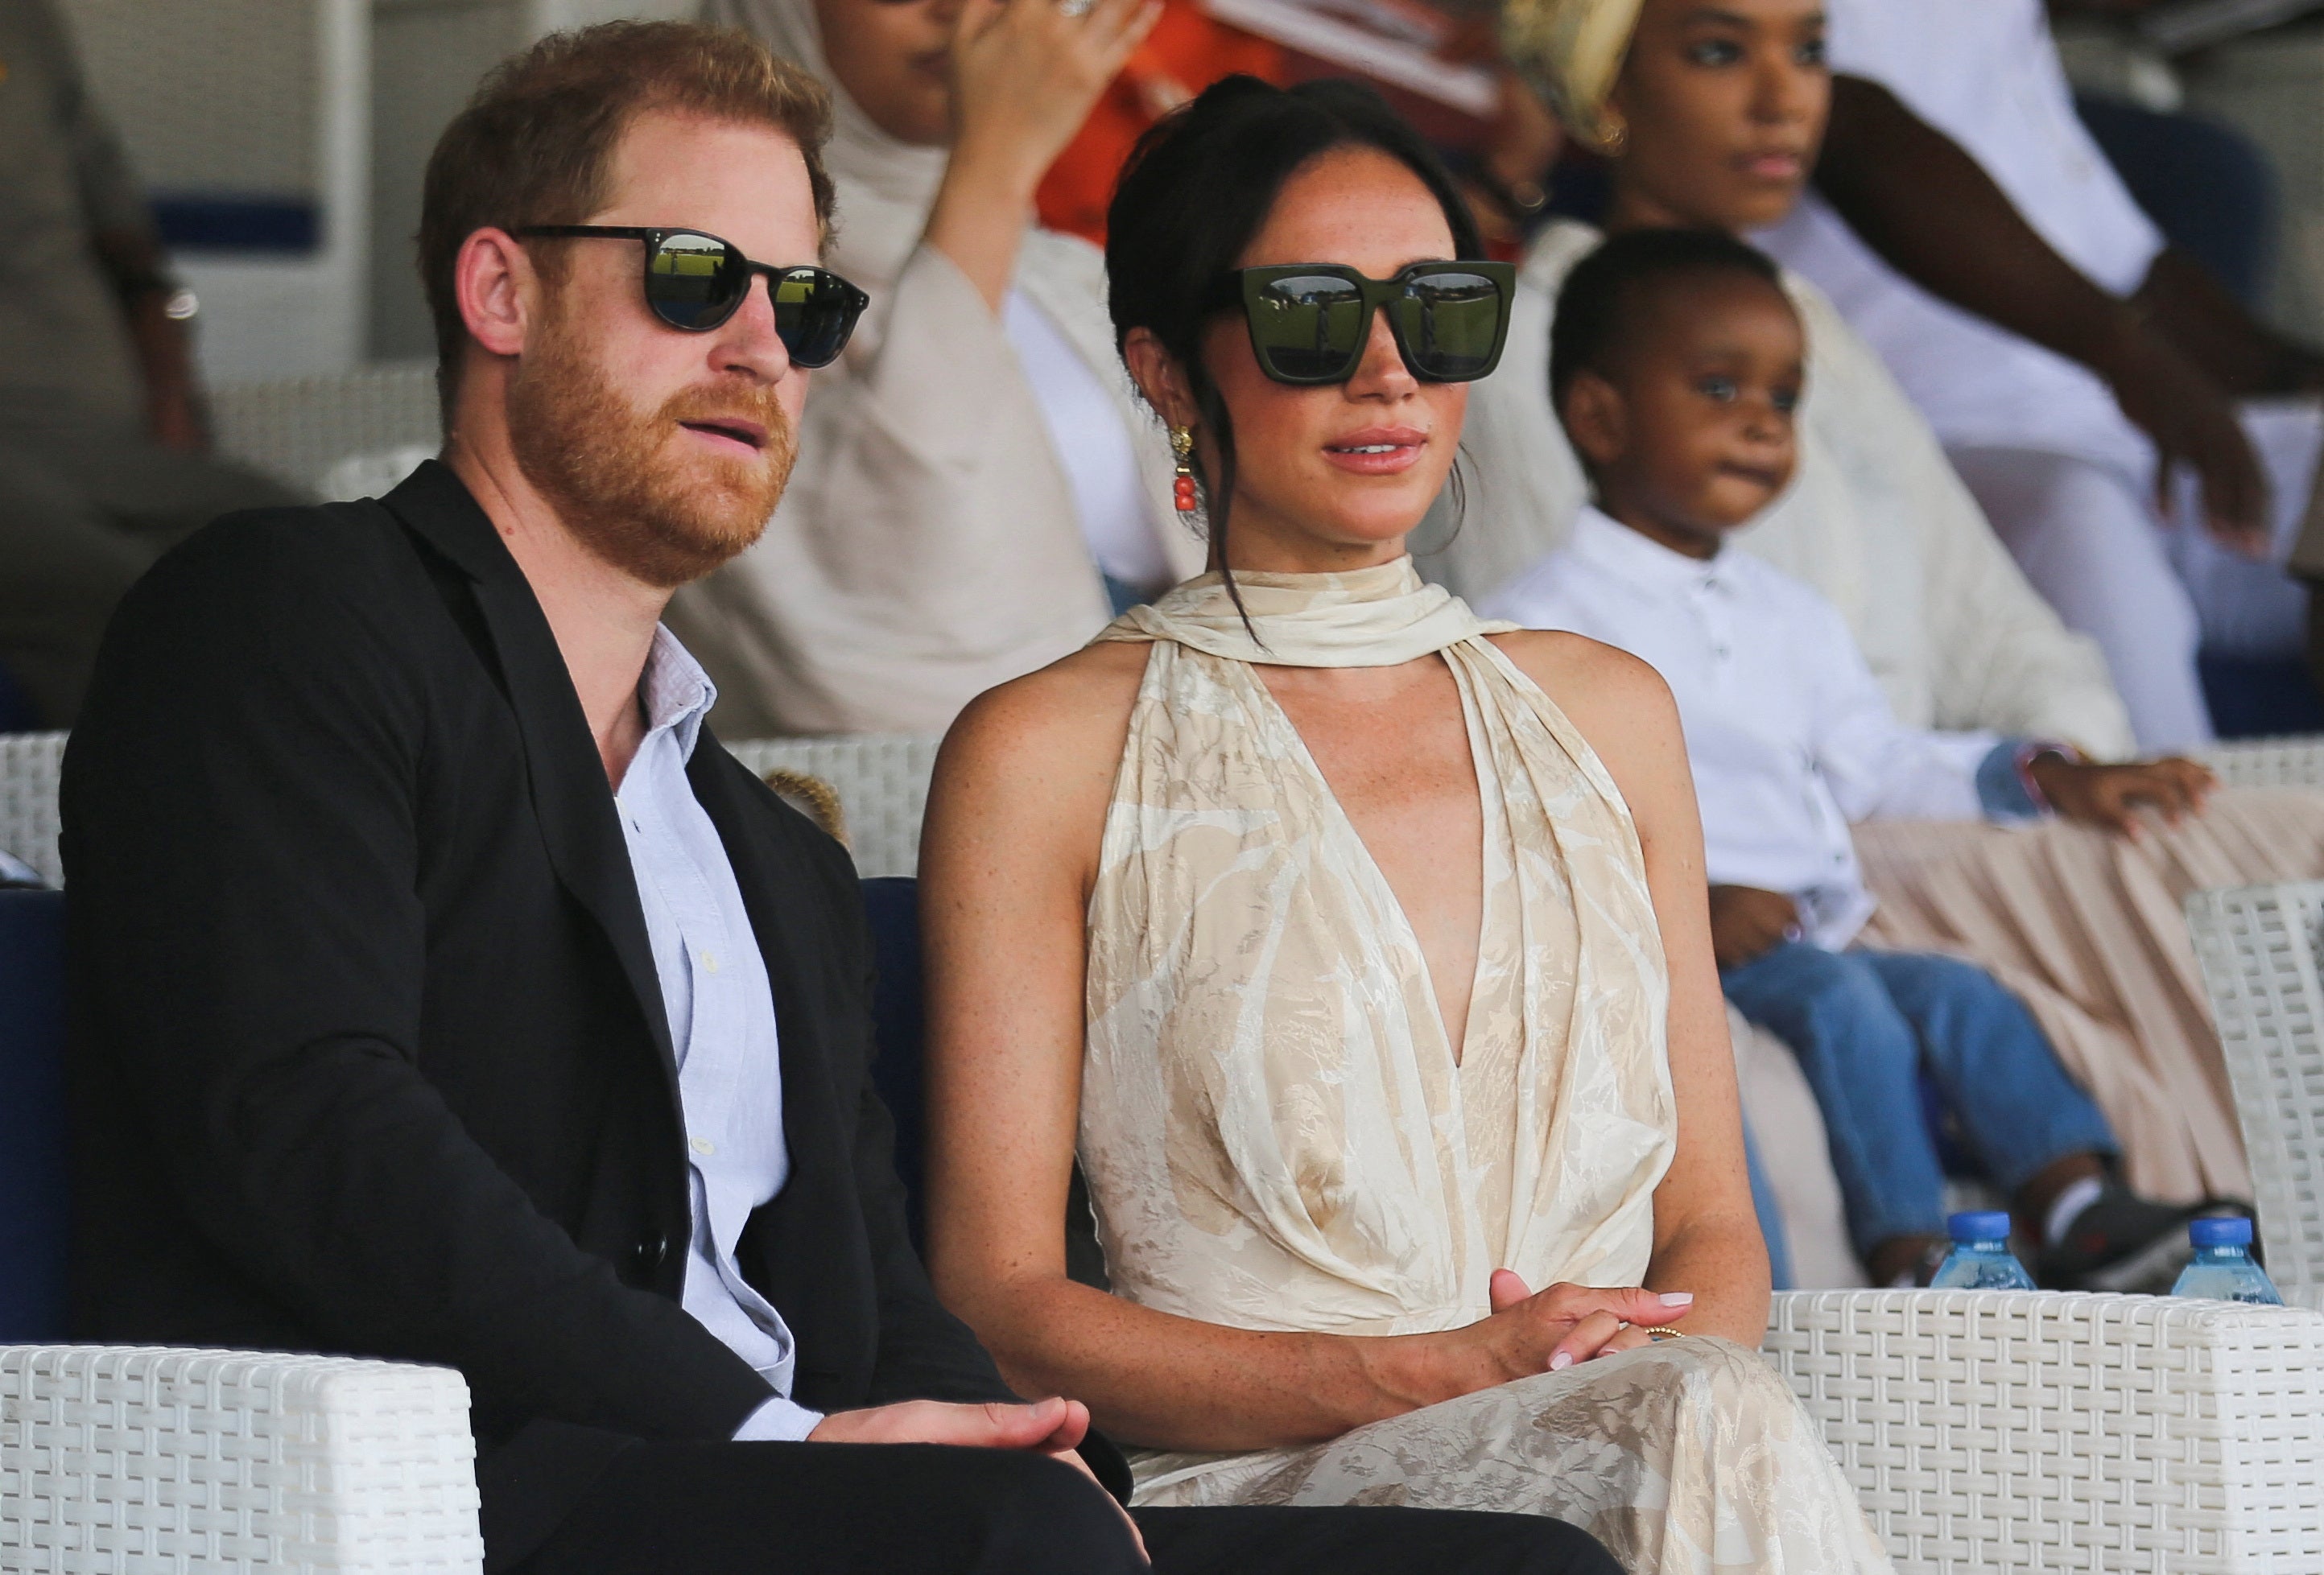 Harry and Meghan visited recently visited Nigeria to celebrate the 10th anniversary of the Invictus Games.